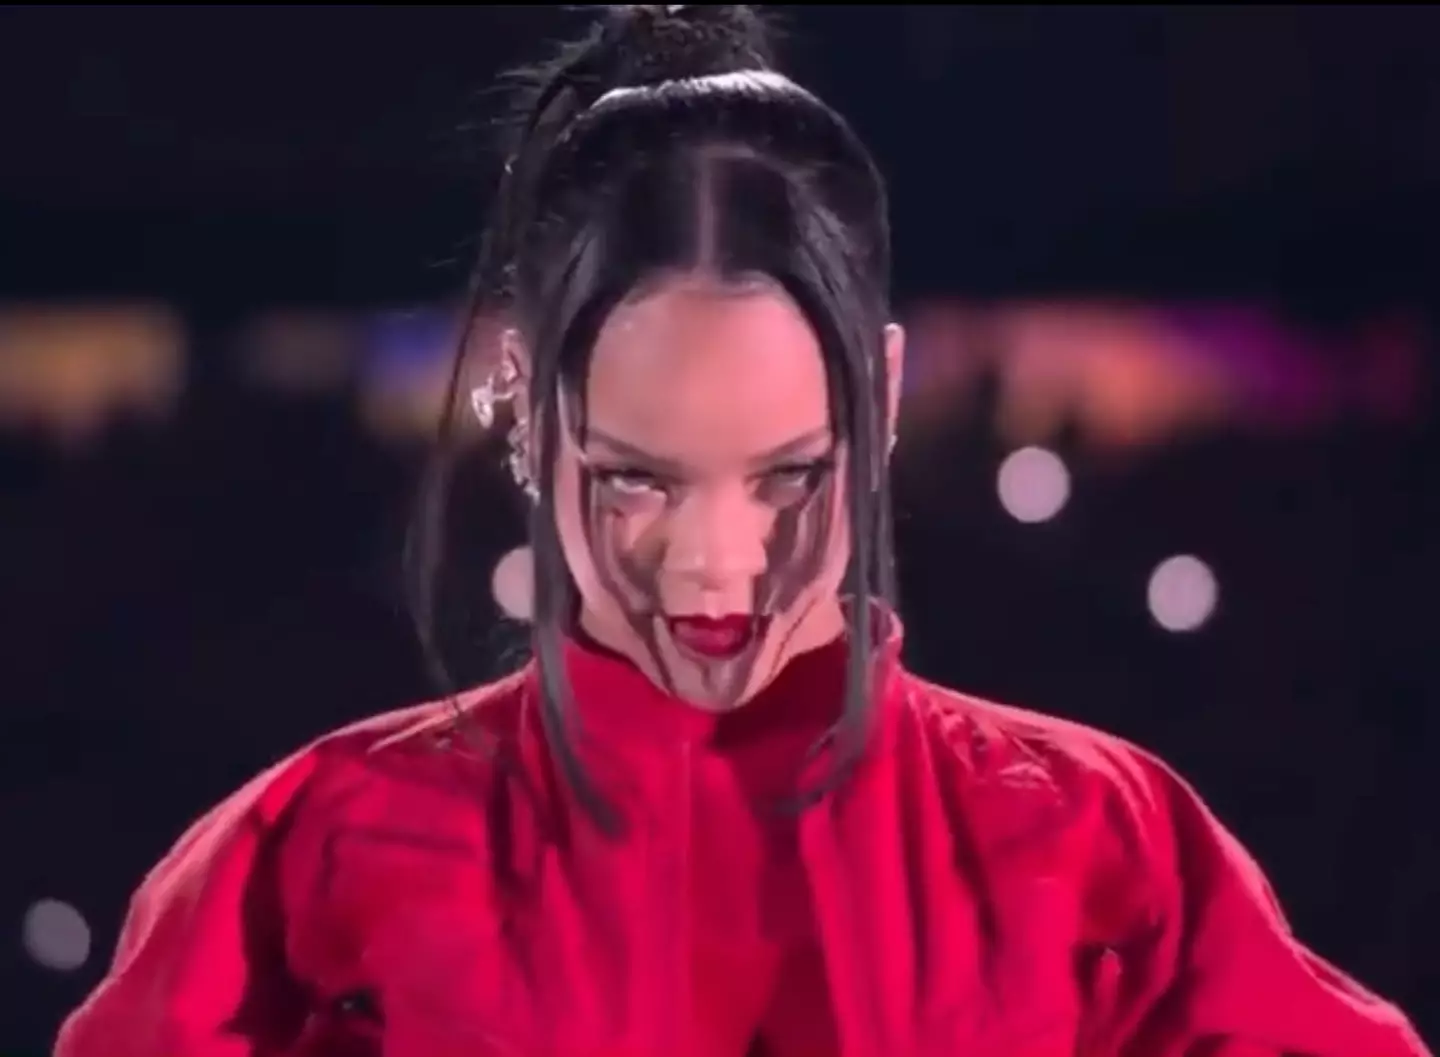 Rihanna thought twice about performing at the Super Bowl this year.